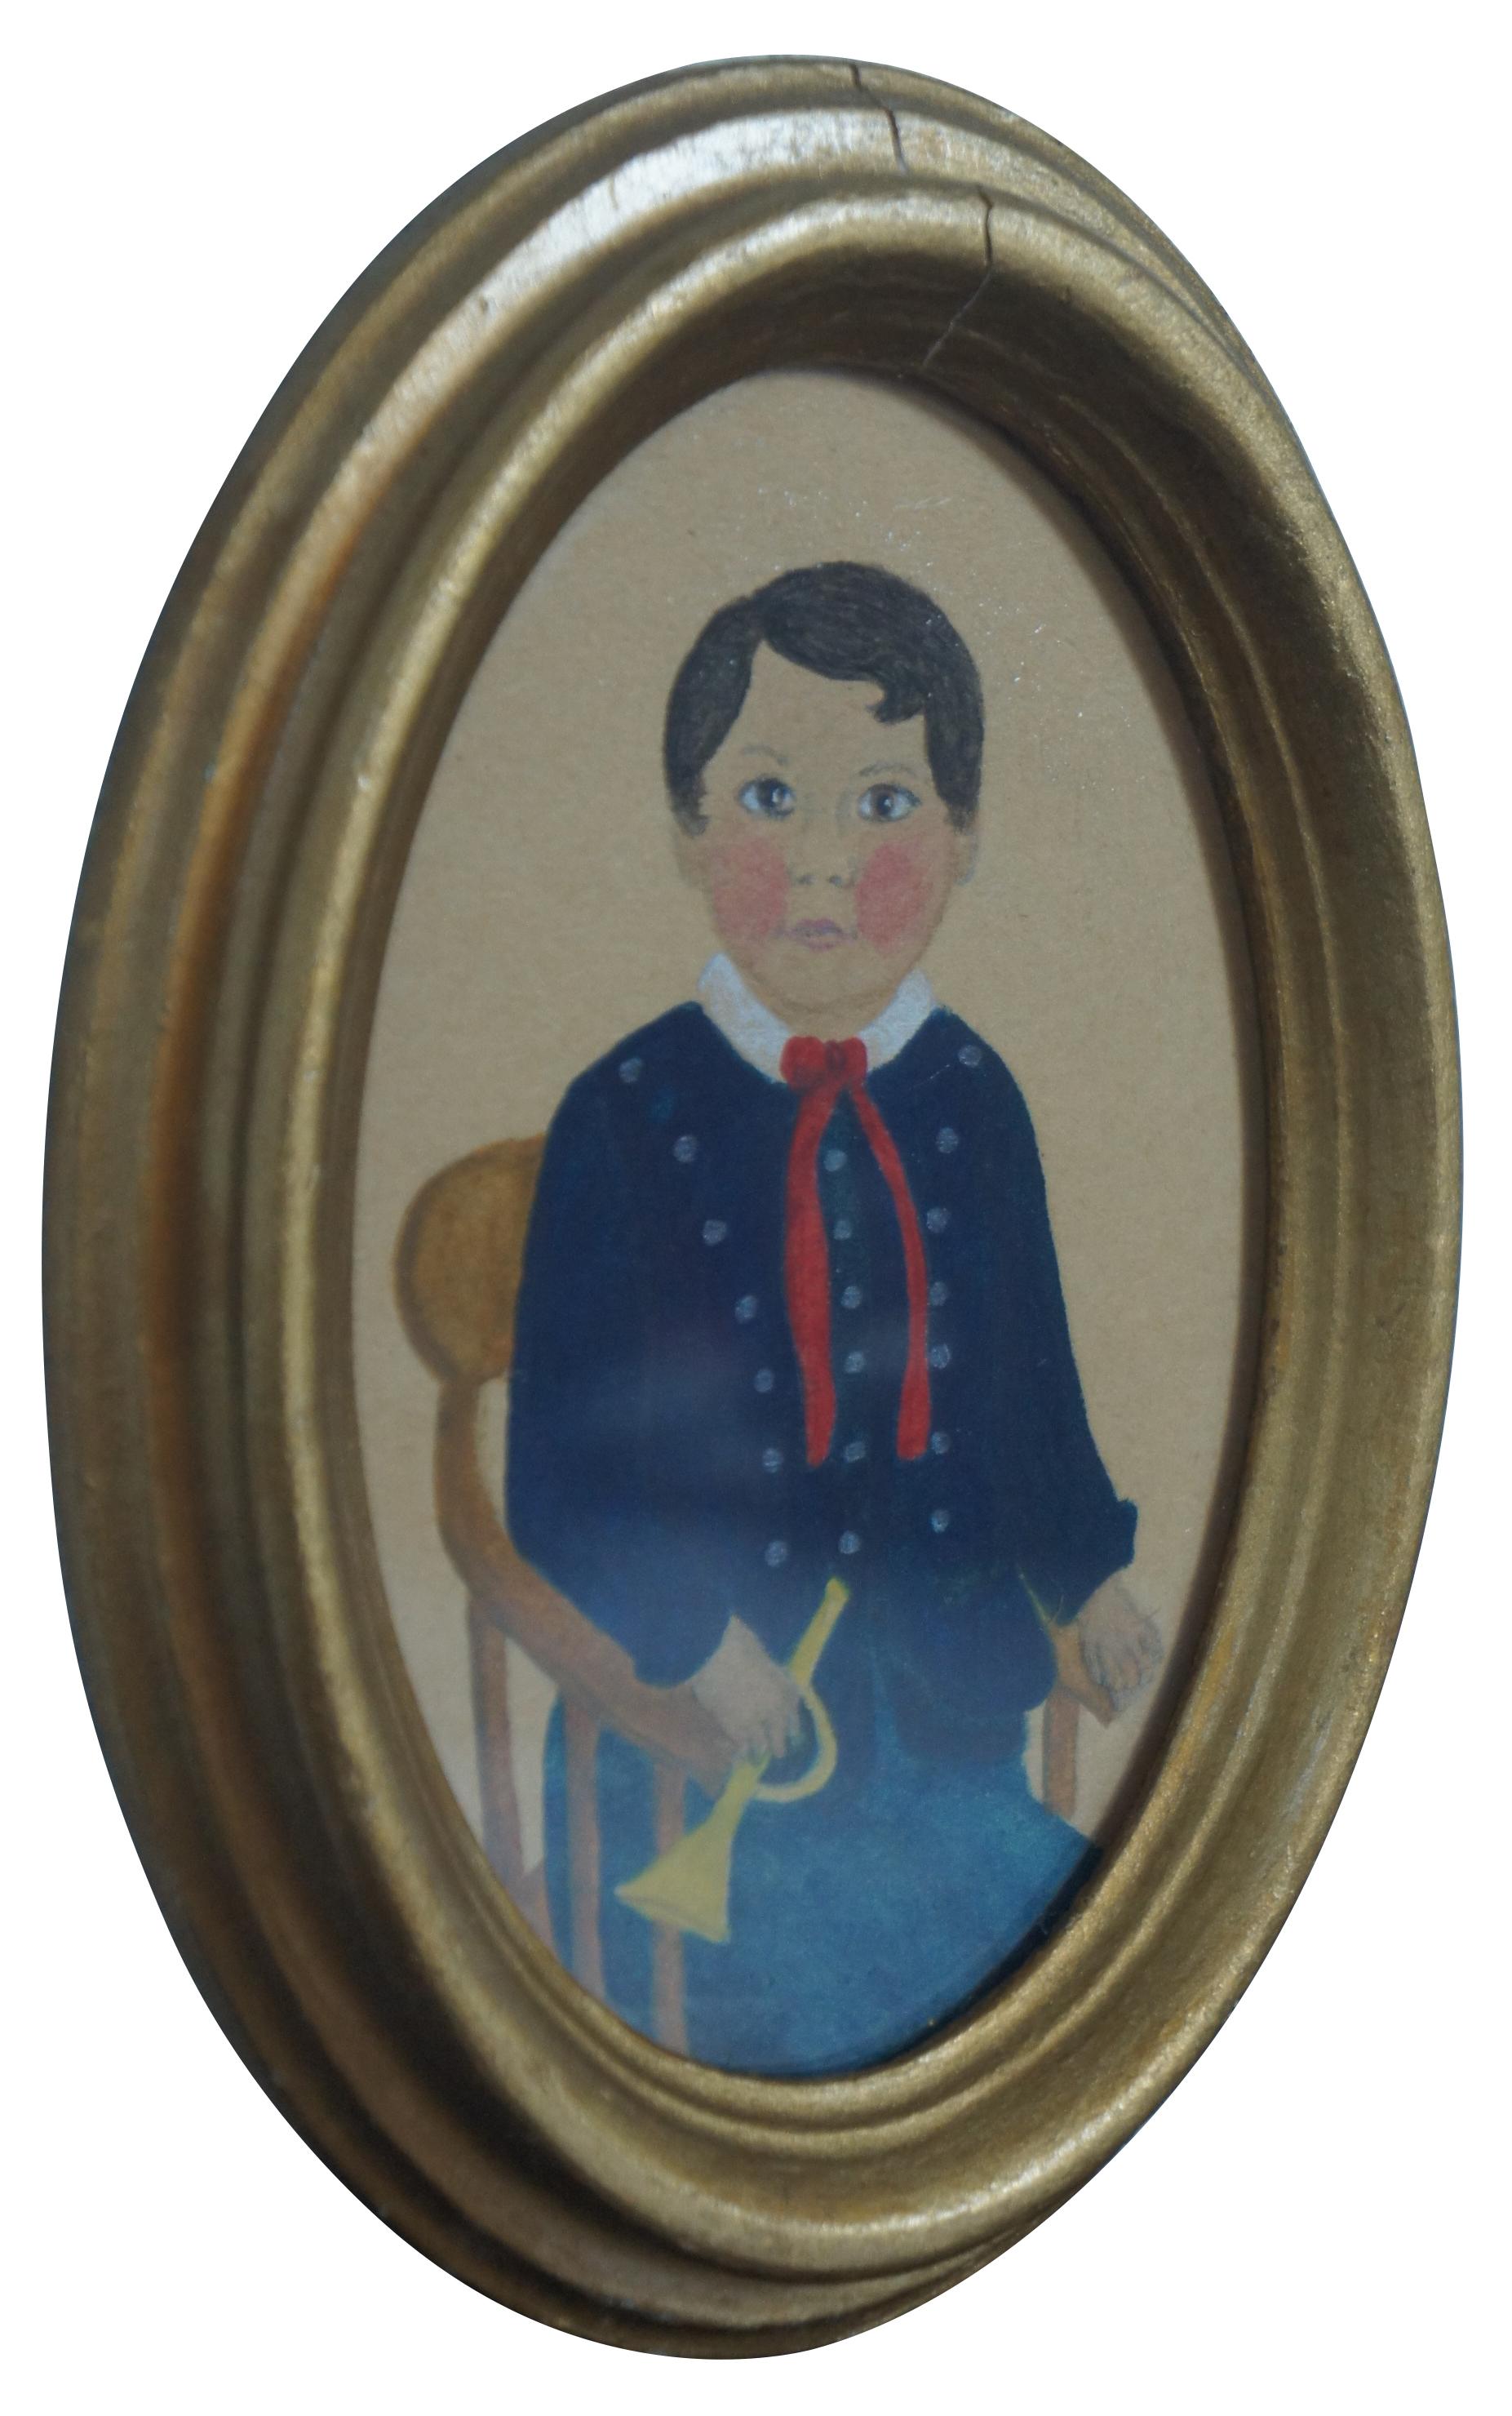 Antique Victorian Americana watercolor portrait of a young boy dressed in blue and holding a horn. Signed P. Hackett on the back of the frame.